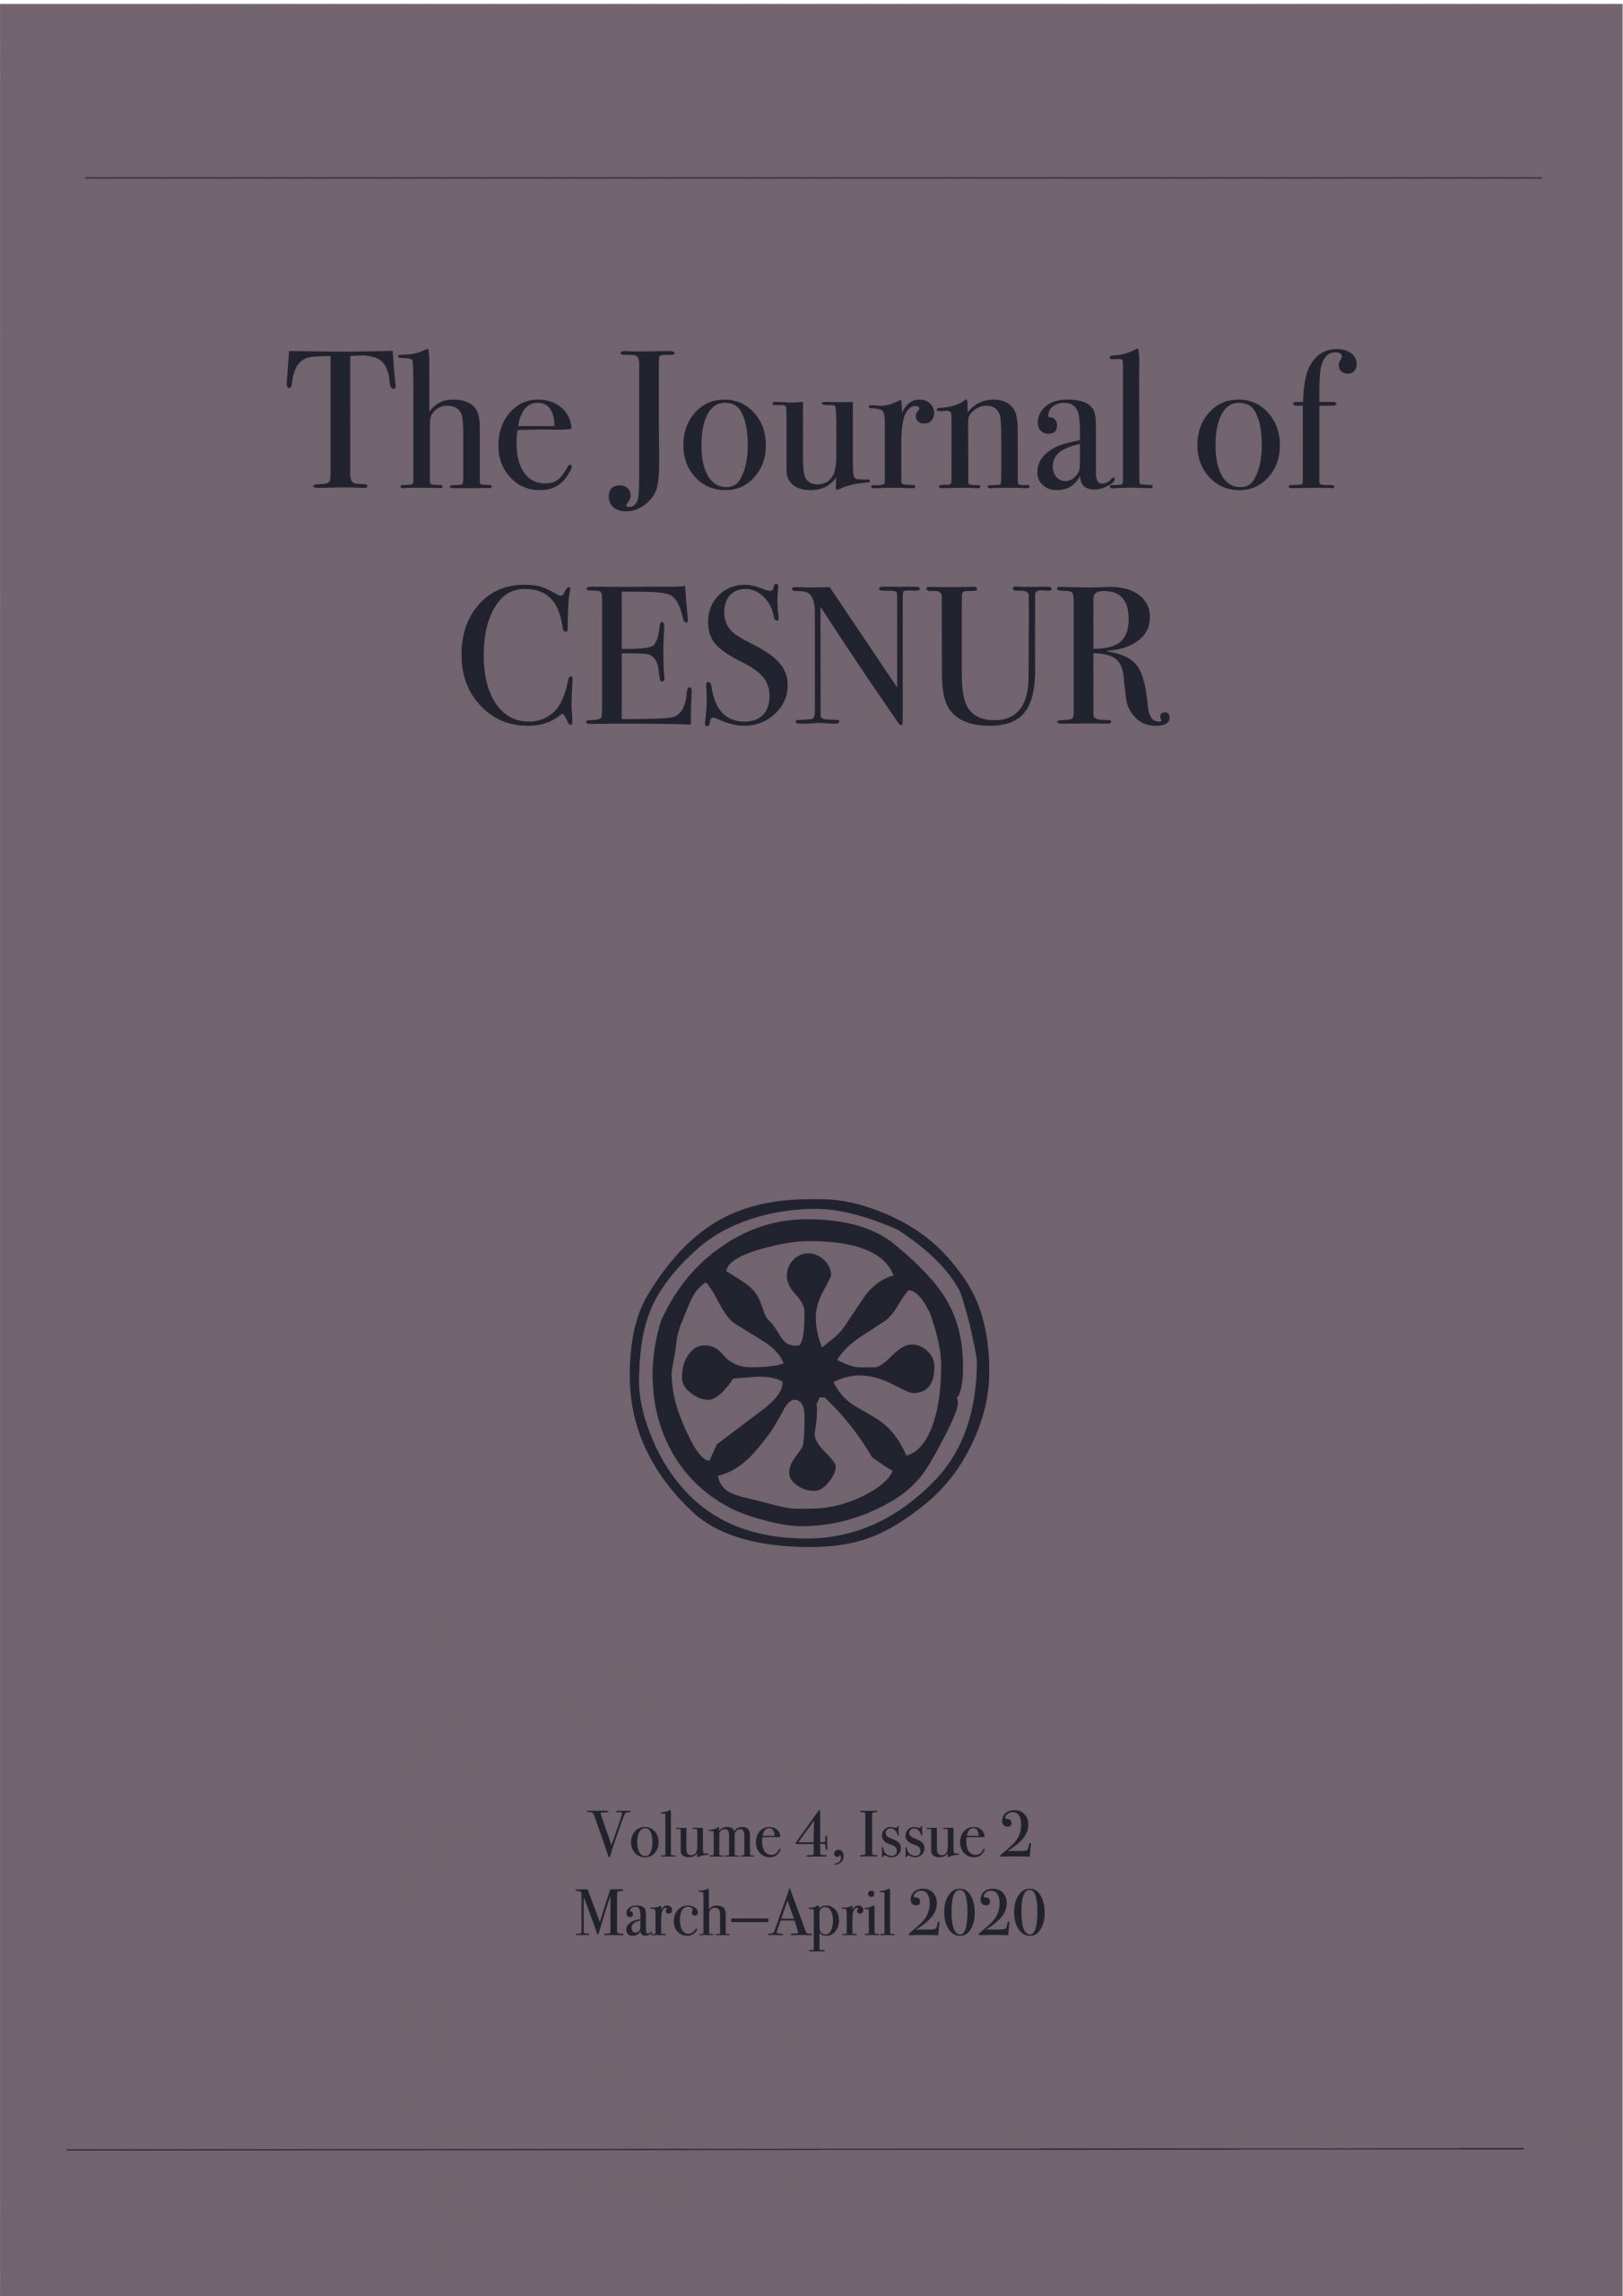 The journal of Cesnur Volume 4, Issue 2_cover